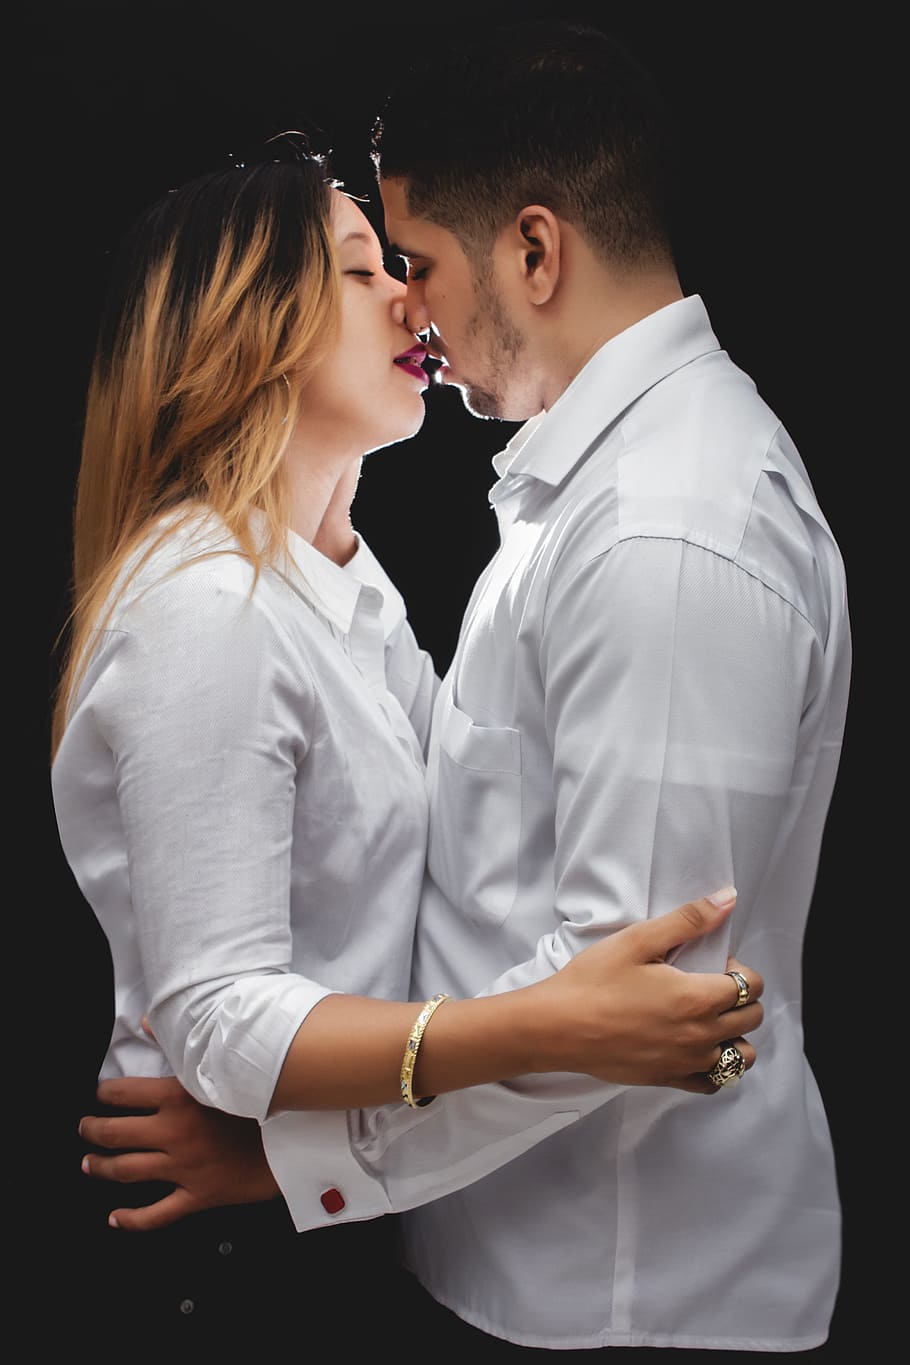 close-up photo, man, woman, Husbands, Kiss, Studio, People, Marry, couple in love, nuptials